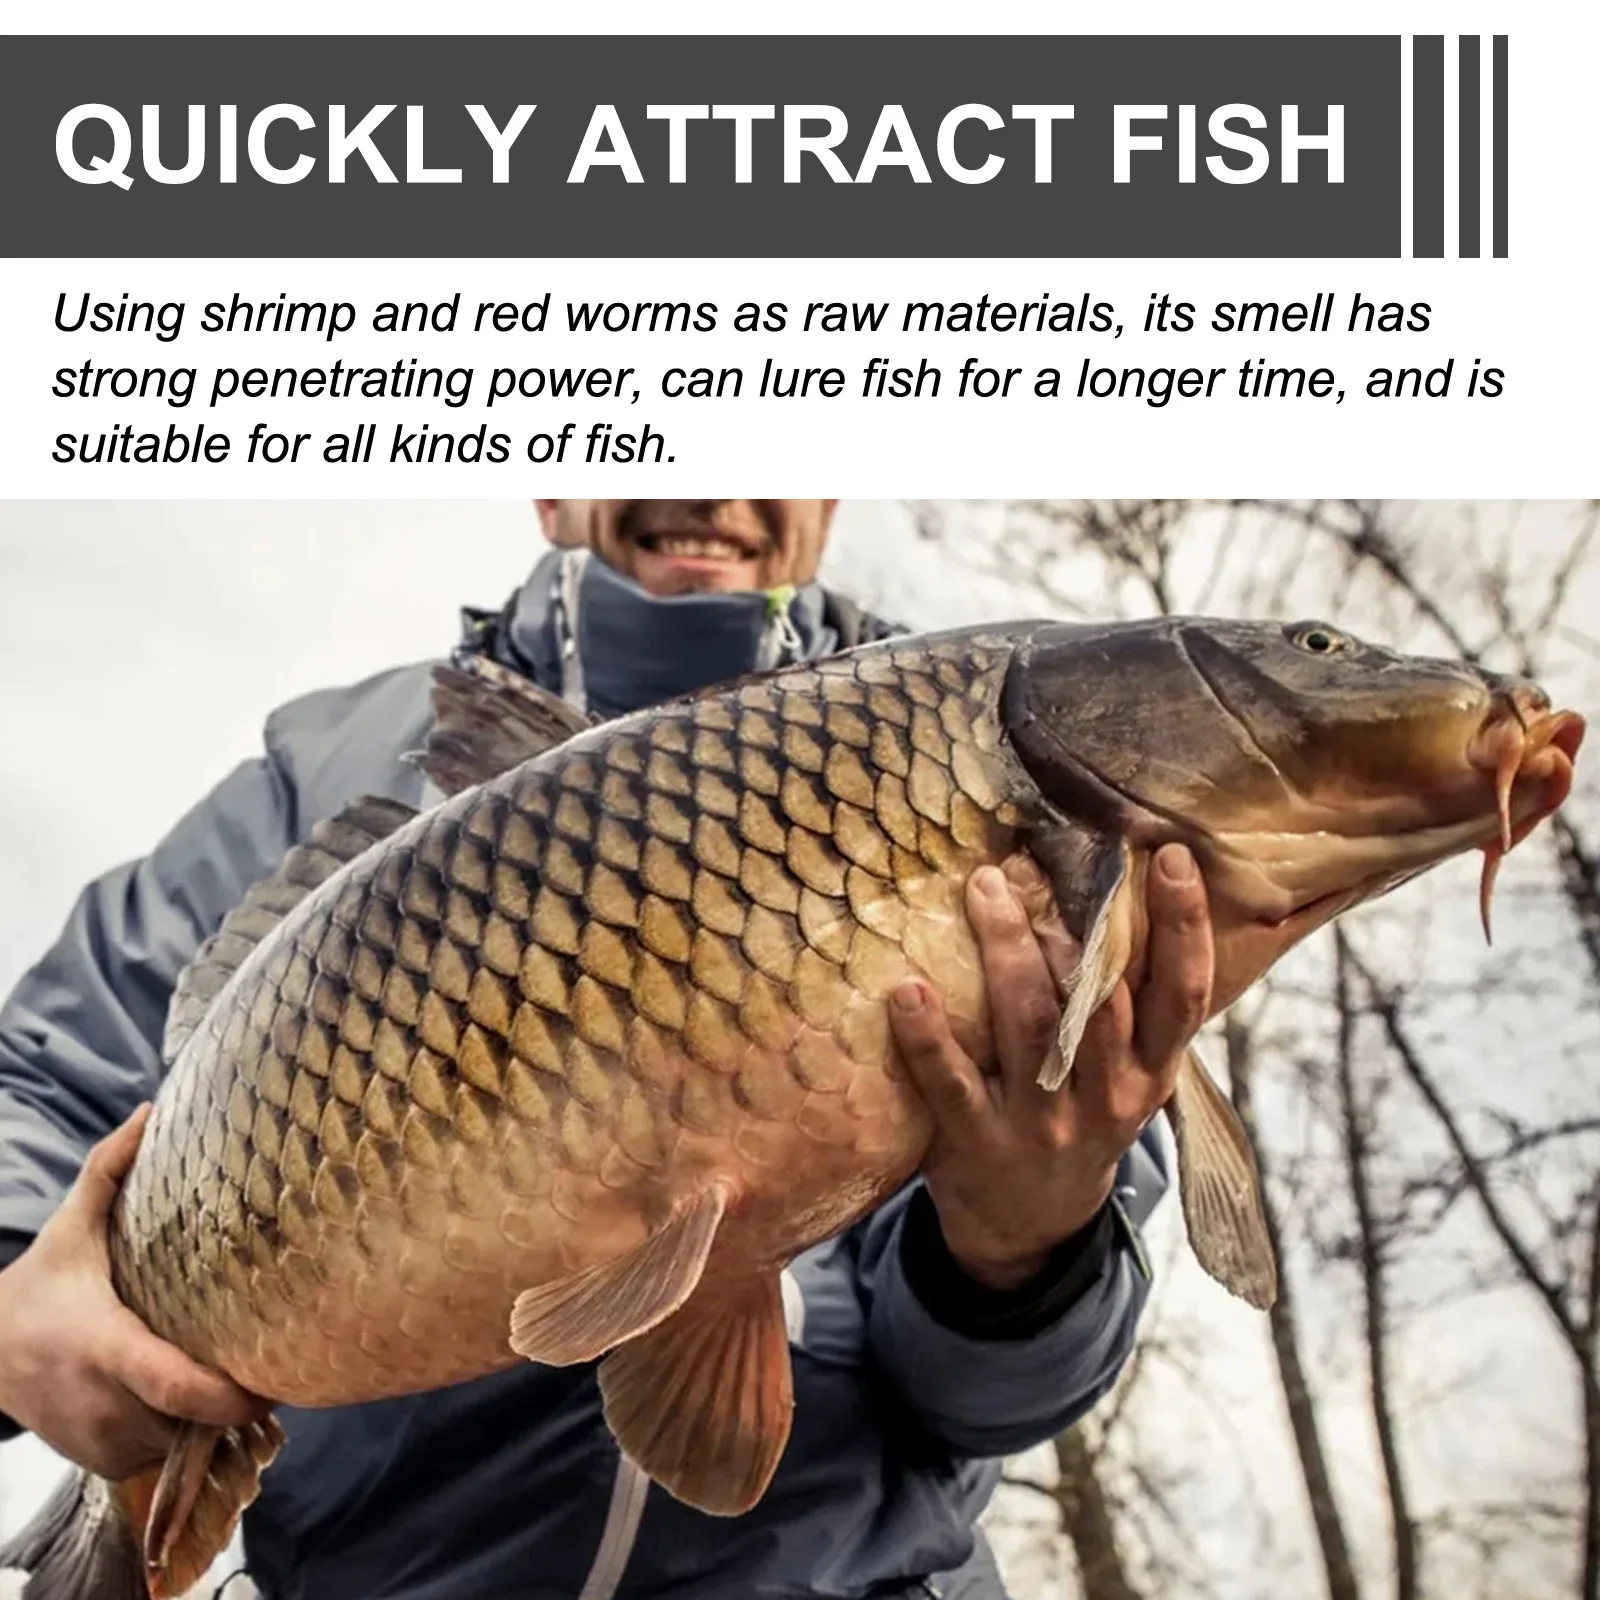 https://ae01.alicdn.com/kf/Sf23bade945e44bbbbf286b26ca7f1541n/Fish-Bait-Powder-Additive-Fishmeal-Fish-Buster-Carp-Killer-Concentrated-Blood-Worm-Scent-Shrimp-Smell-Attractant.jpg